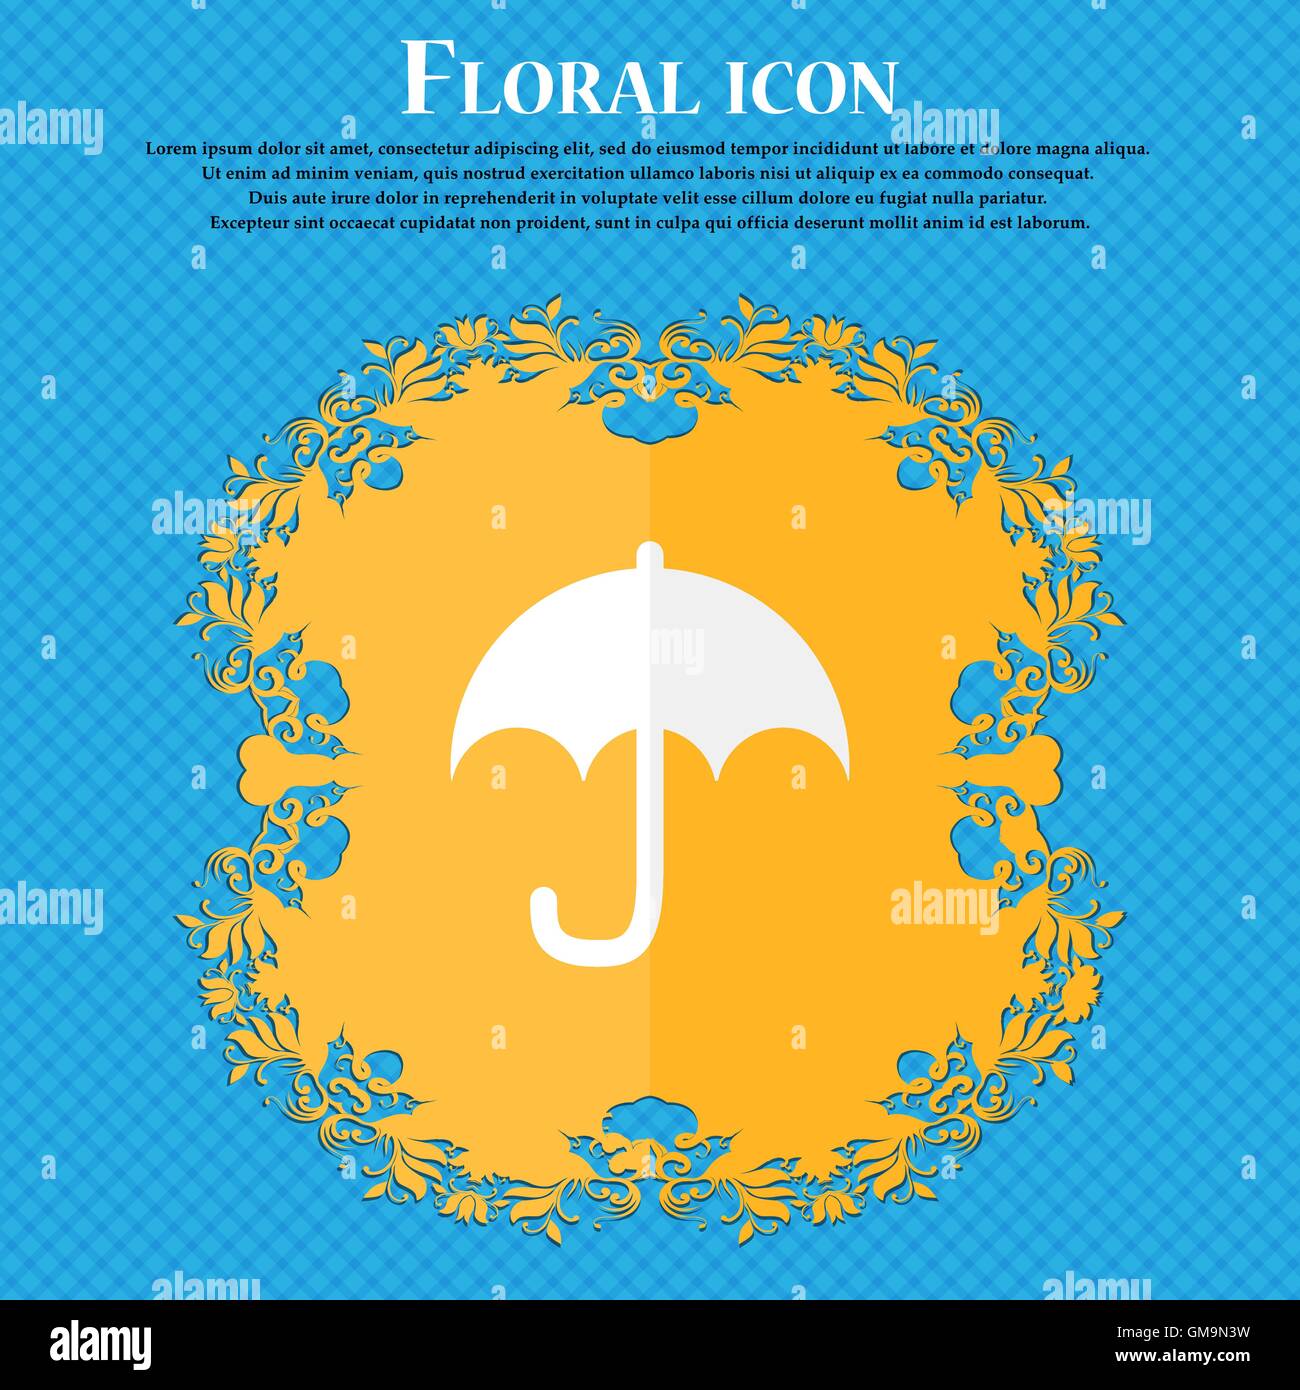 Umbrella . Floral flat design on a blue abstract background with place for your text. Vector Stock Vector